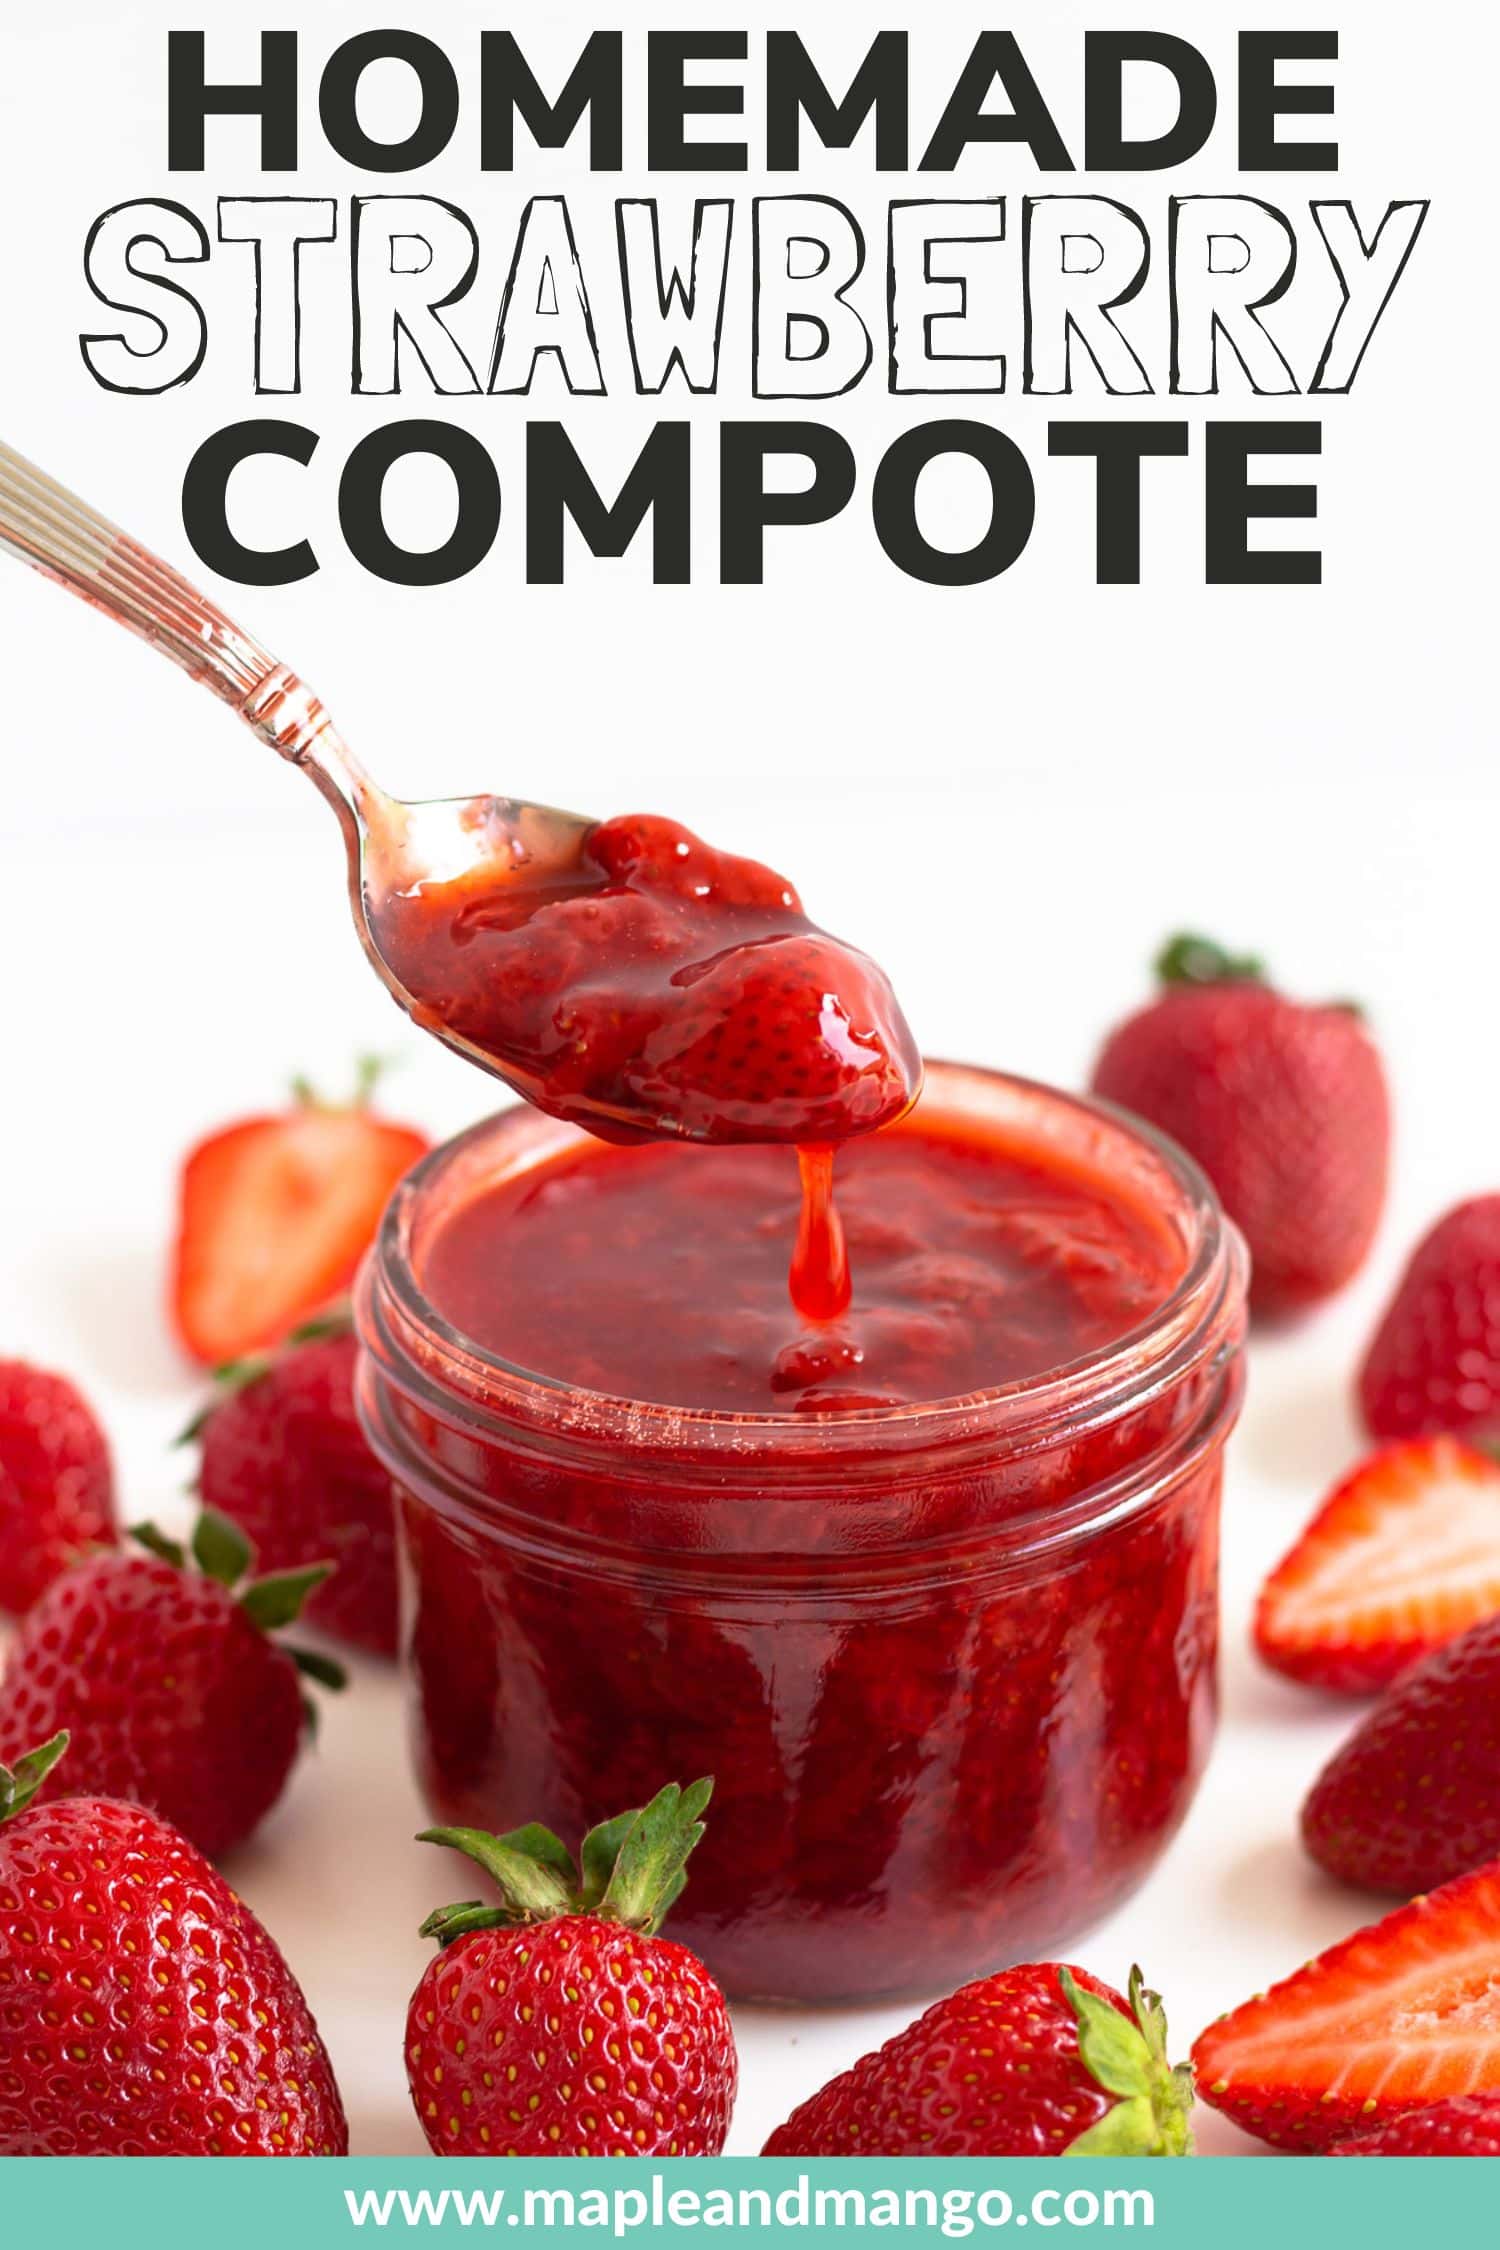 Strawberry compote being lifted out of a jar with a spoon surrounded by fresh strawberries and text overlay that reads "Homemade Strawberry Compote".